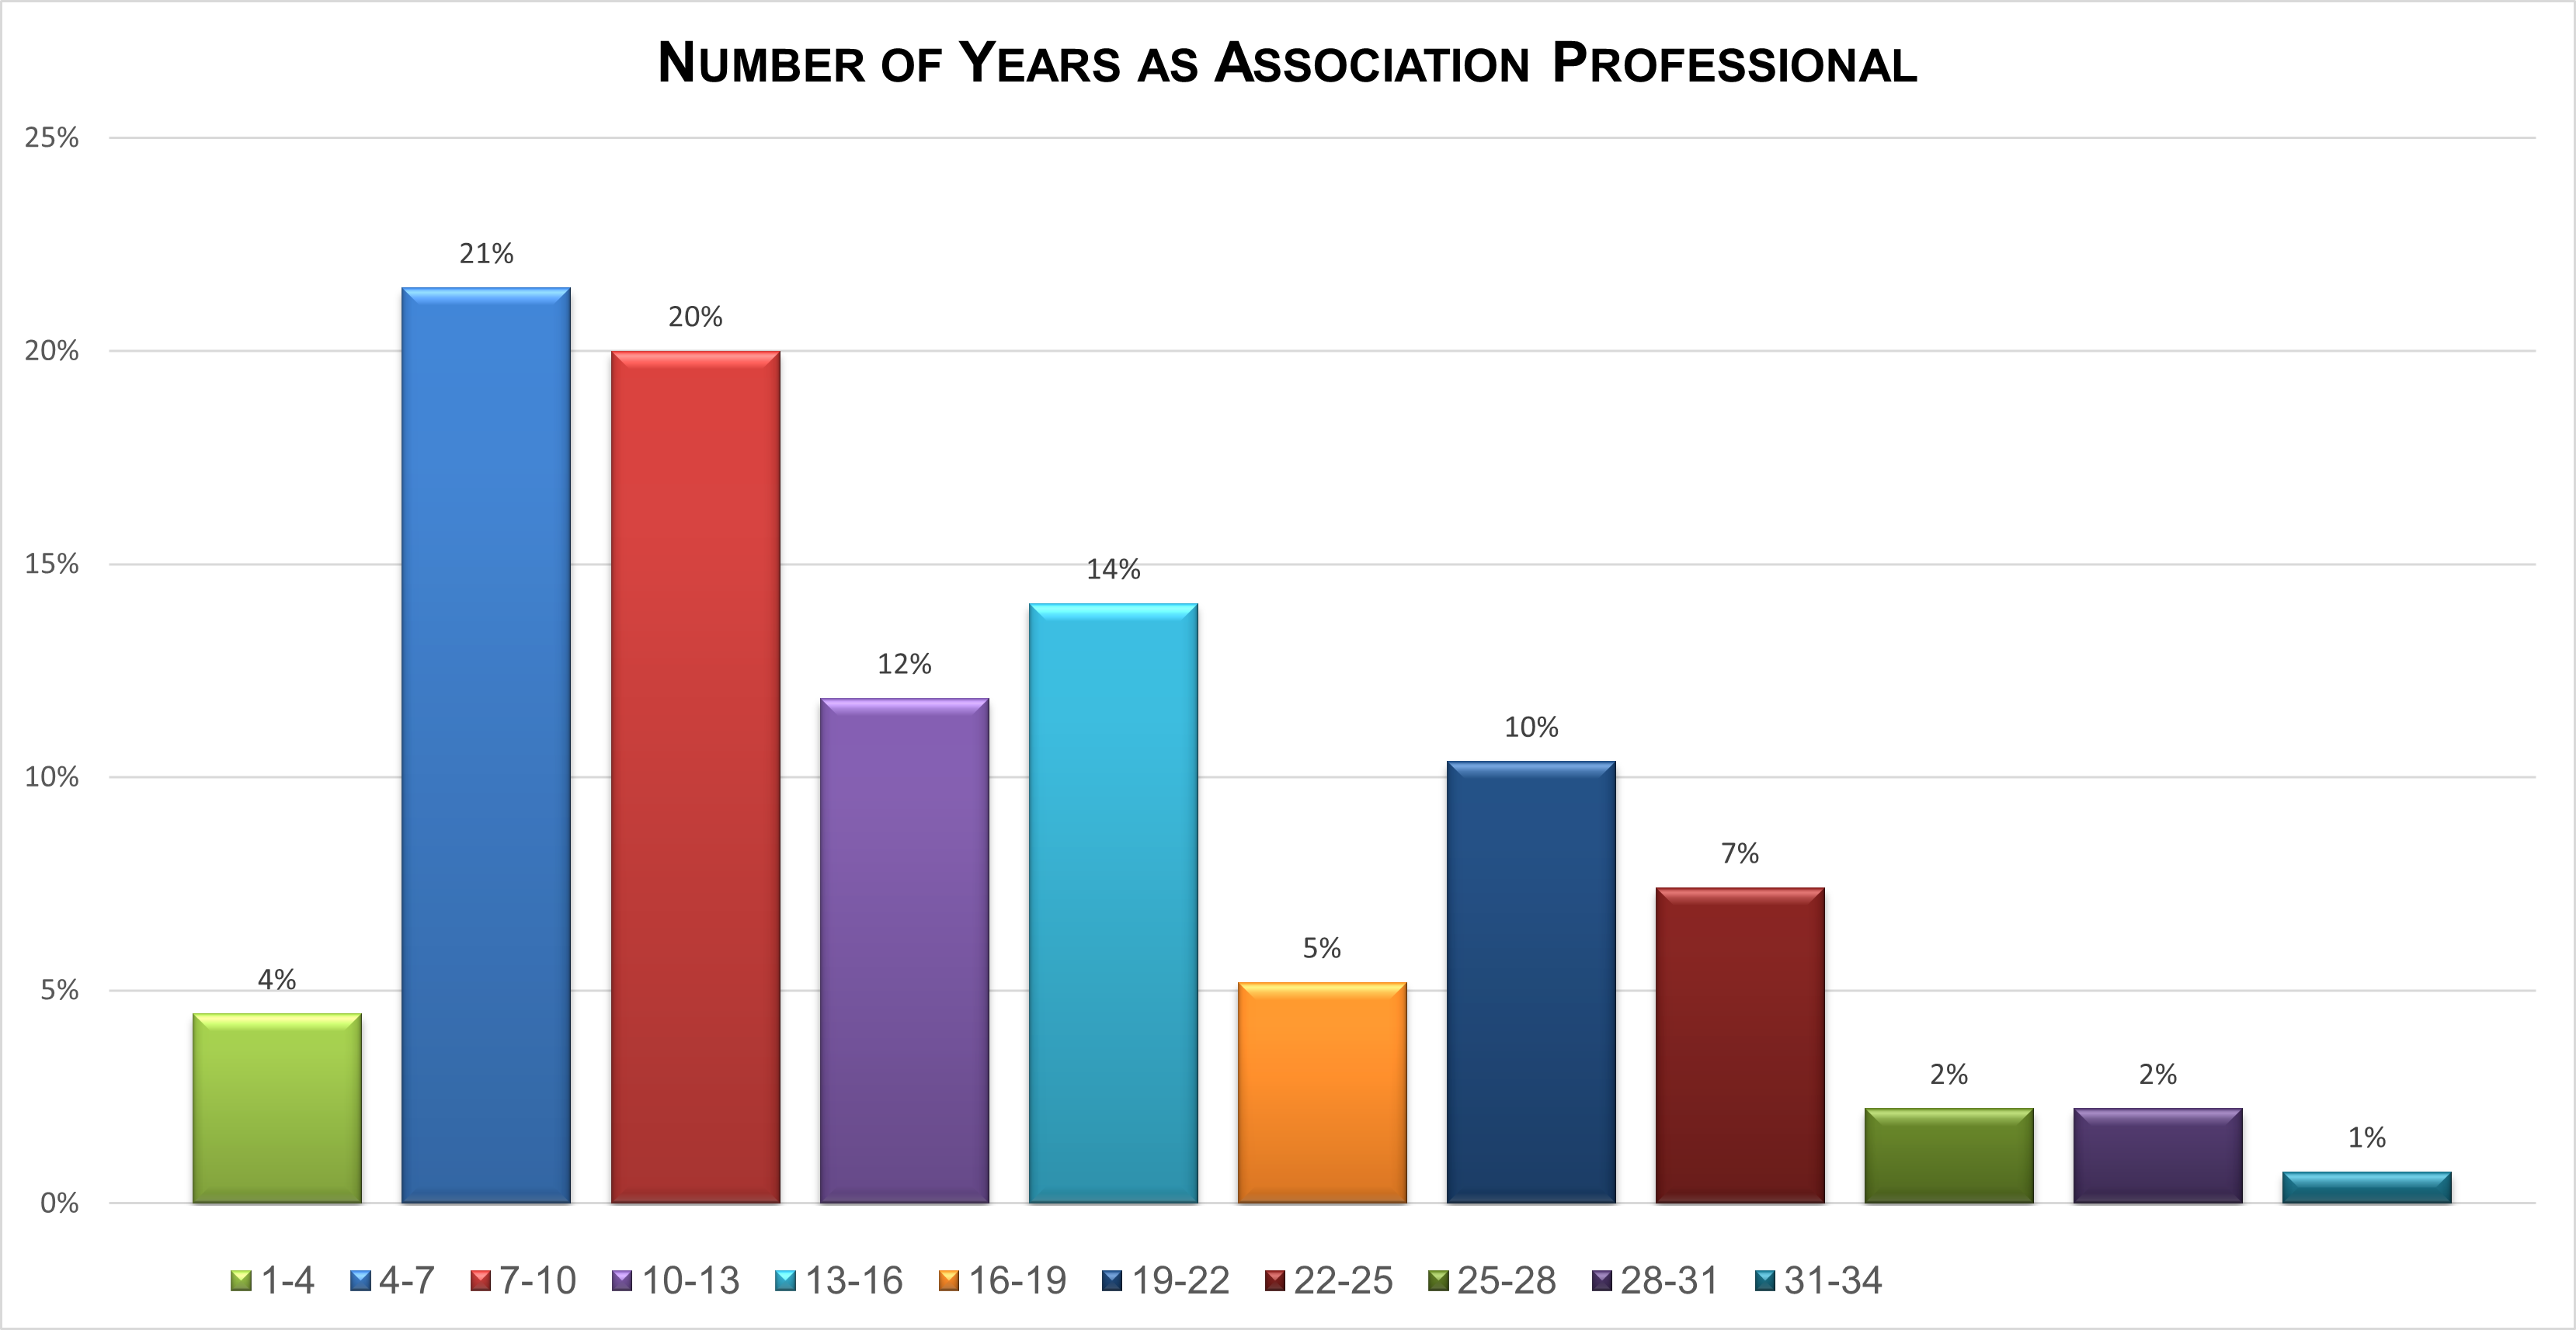 Number of years as an association professional